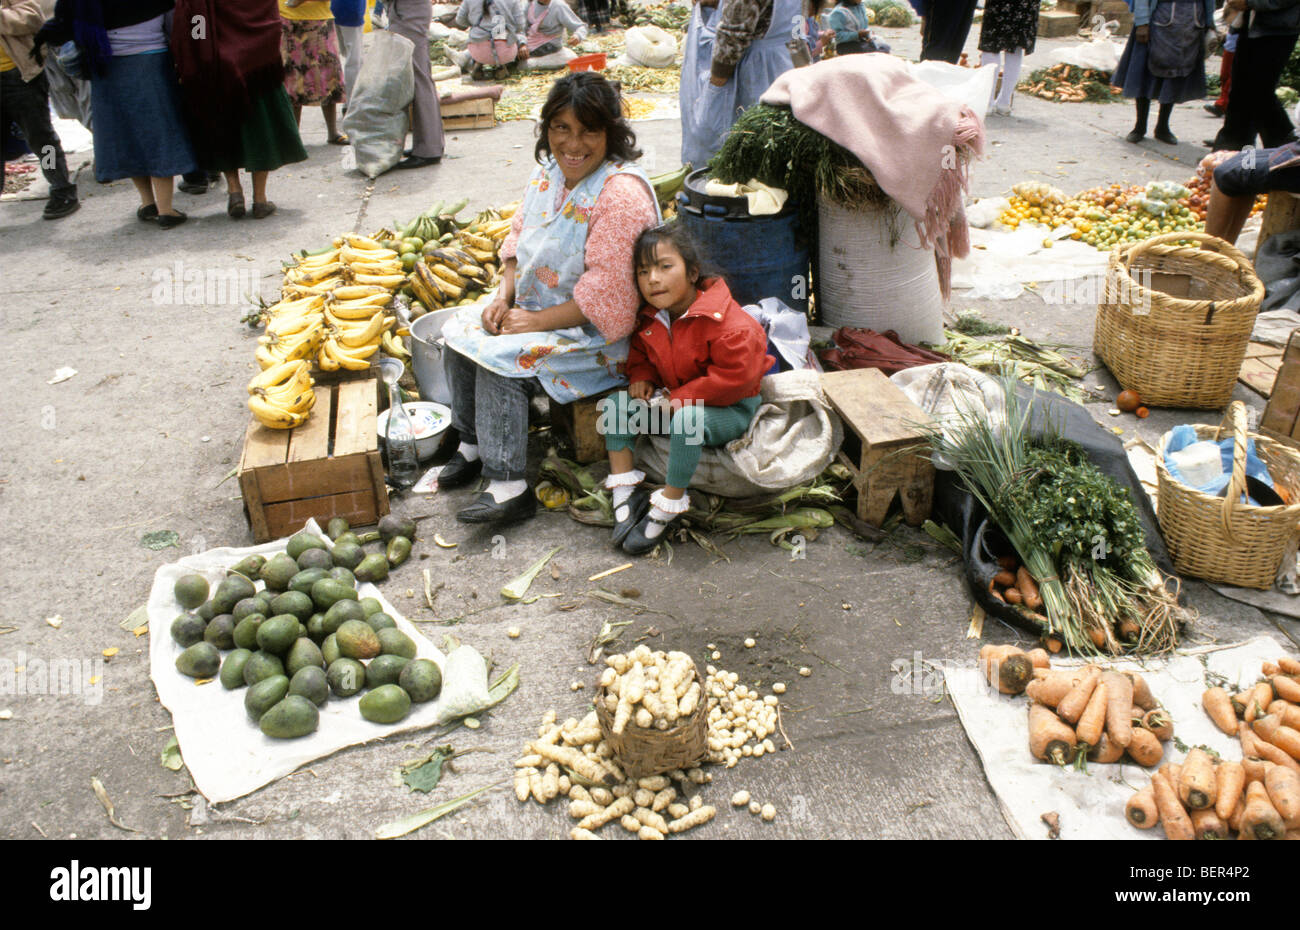 Smiling woman and child sitting on small wooden box amidst fruits and vegetables. Local upland Ecuador market. Stock Photo